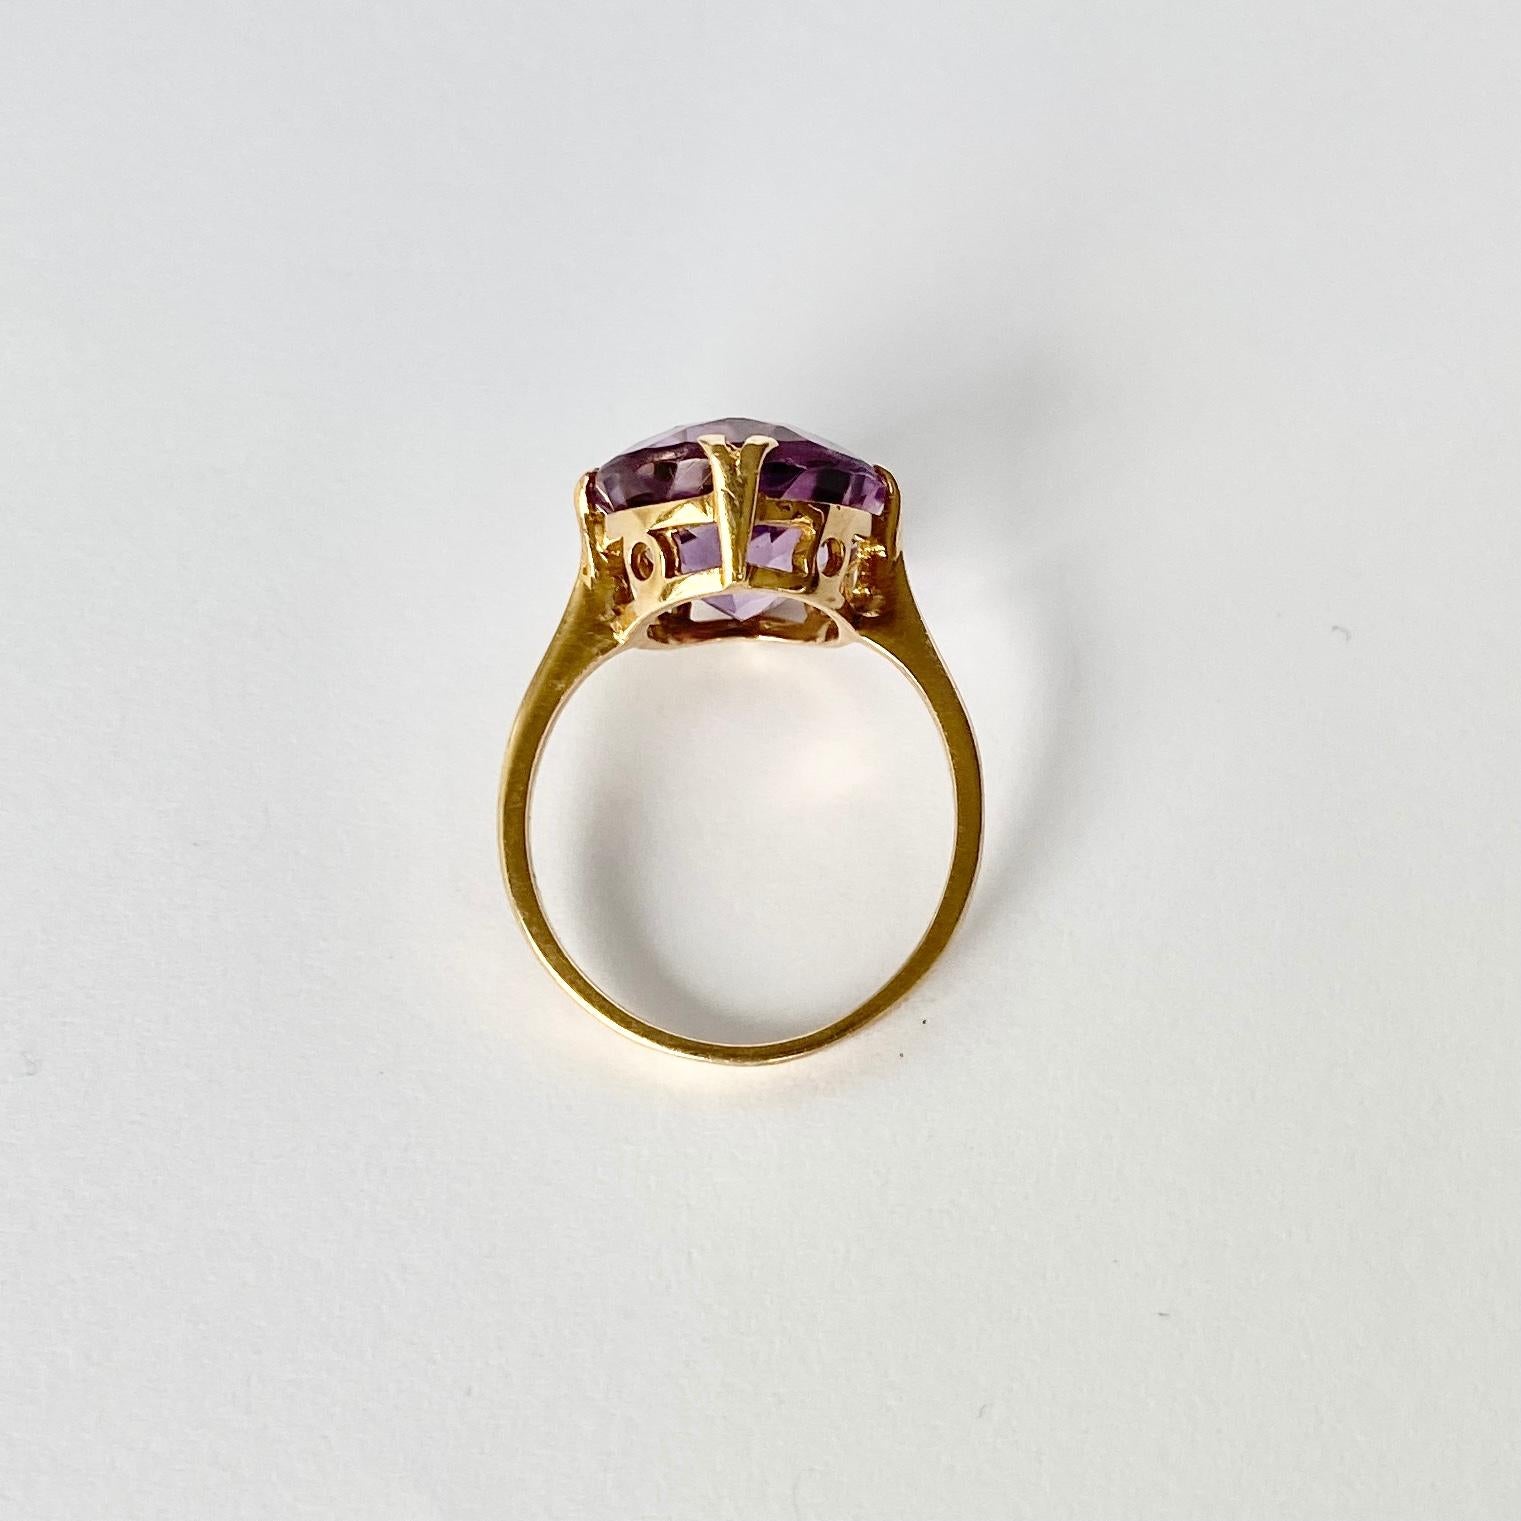 This glossy and bright purple amethyst stone is surrounded by a frame of delicate claws. Fully hallmarked London 1962. 

Ring Size: N or 6 3/4
Stone Dimensions: 12x15mm 

Weight: 3.6g